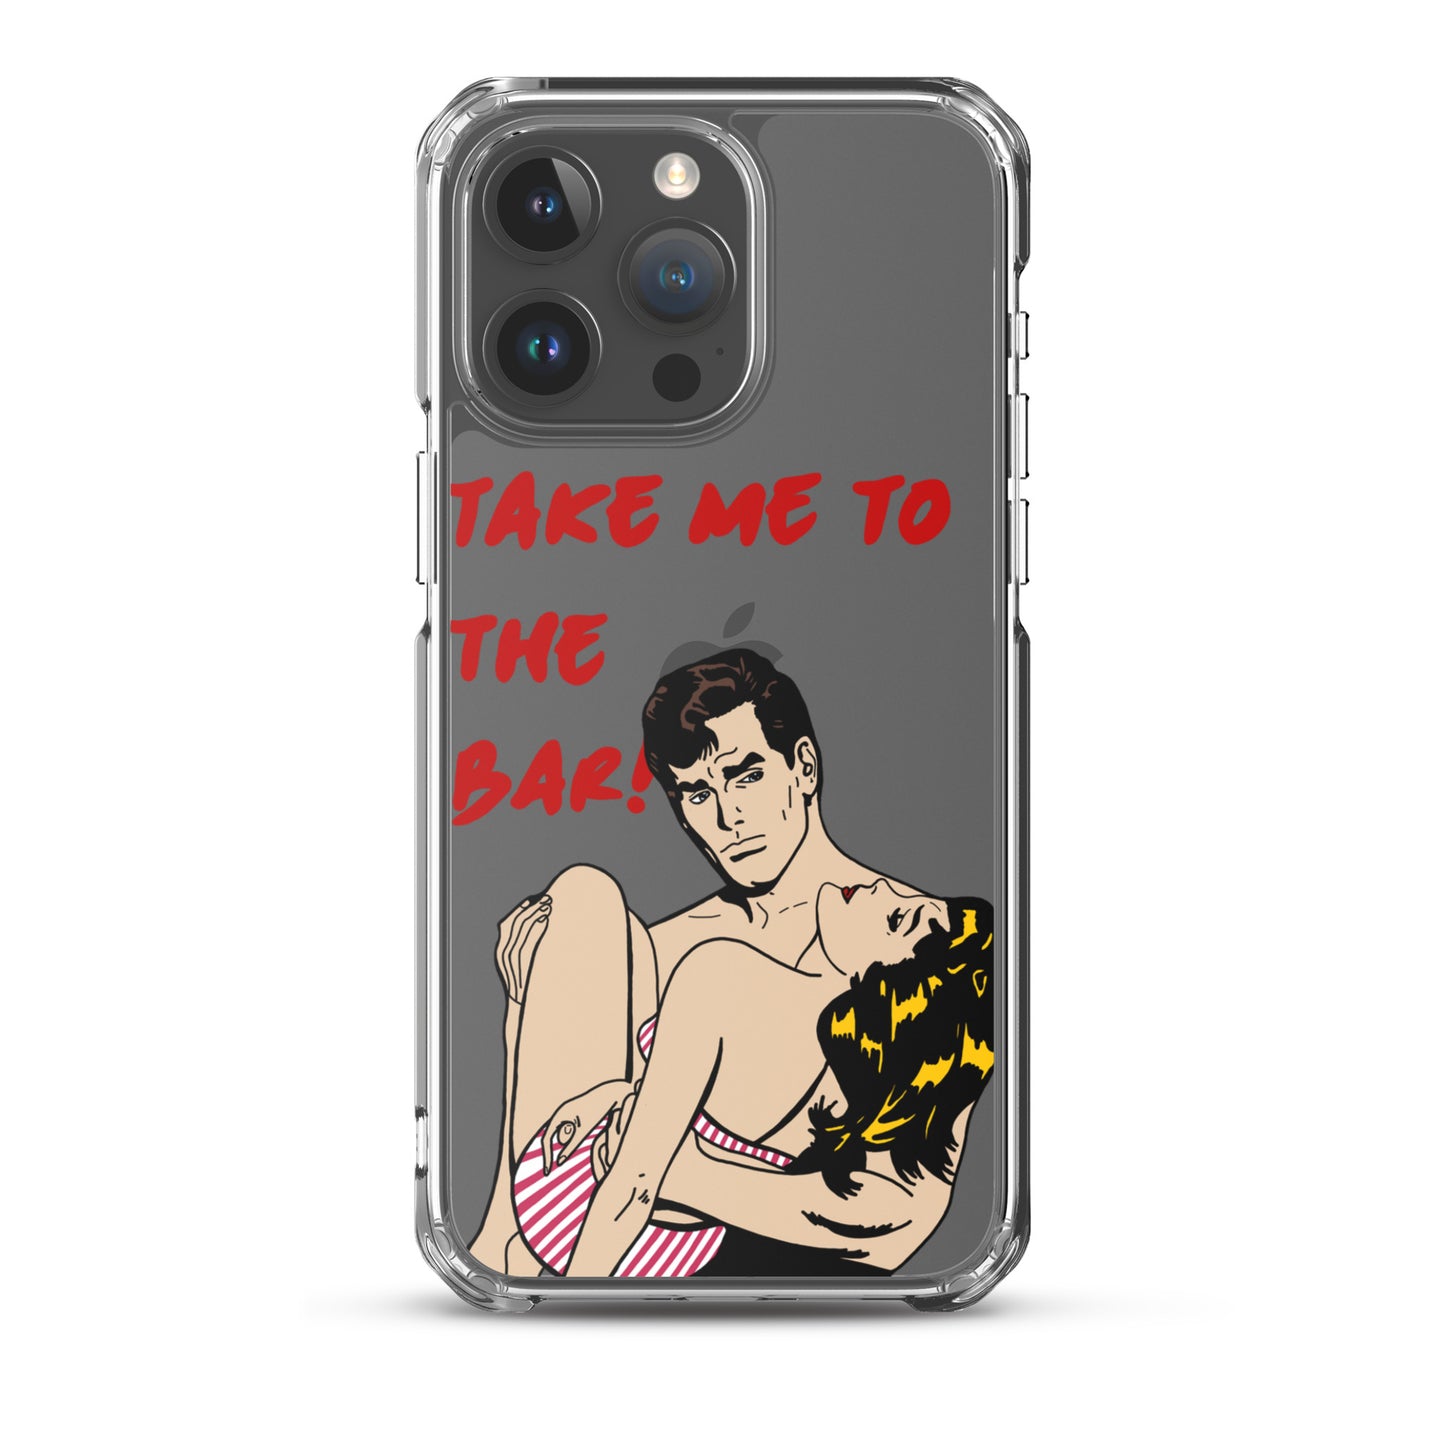 "To The Bar!" iPhone Case